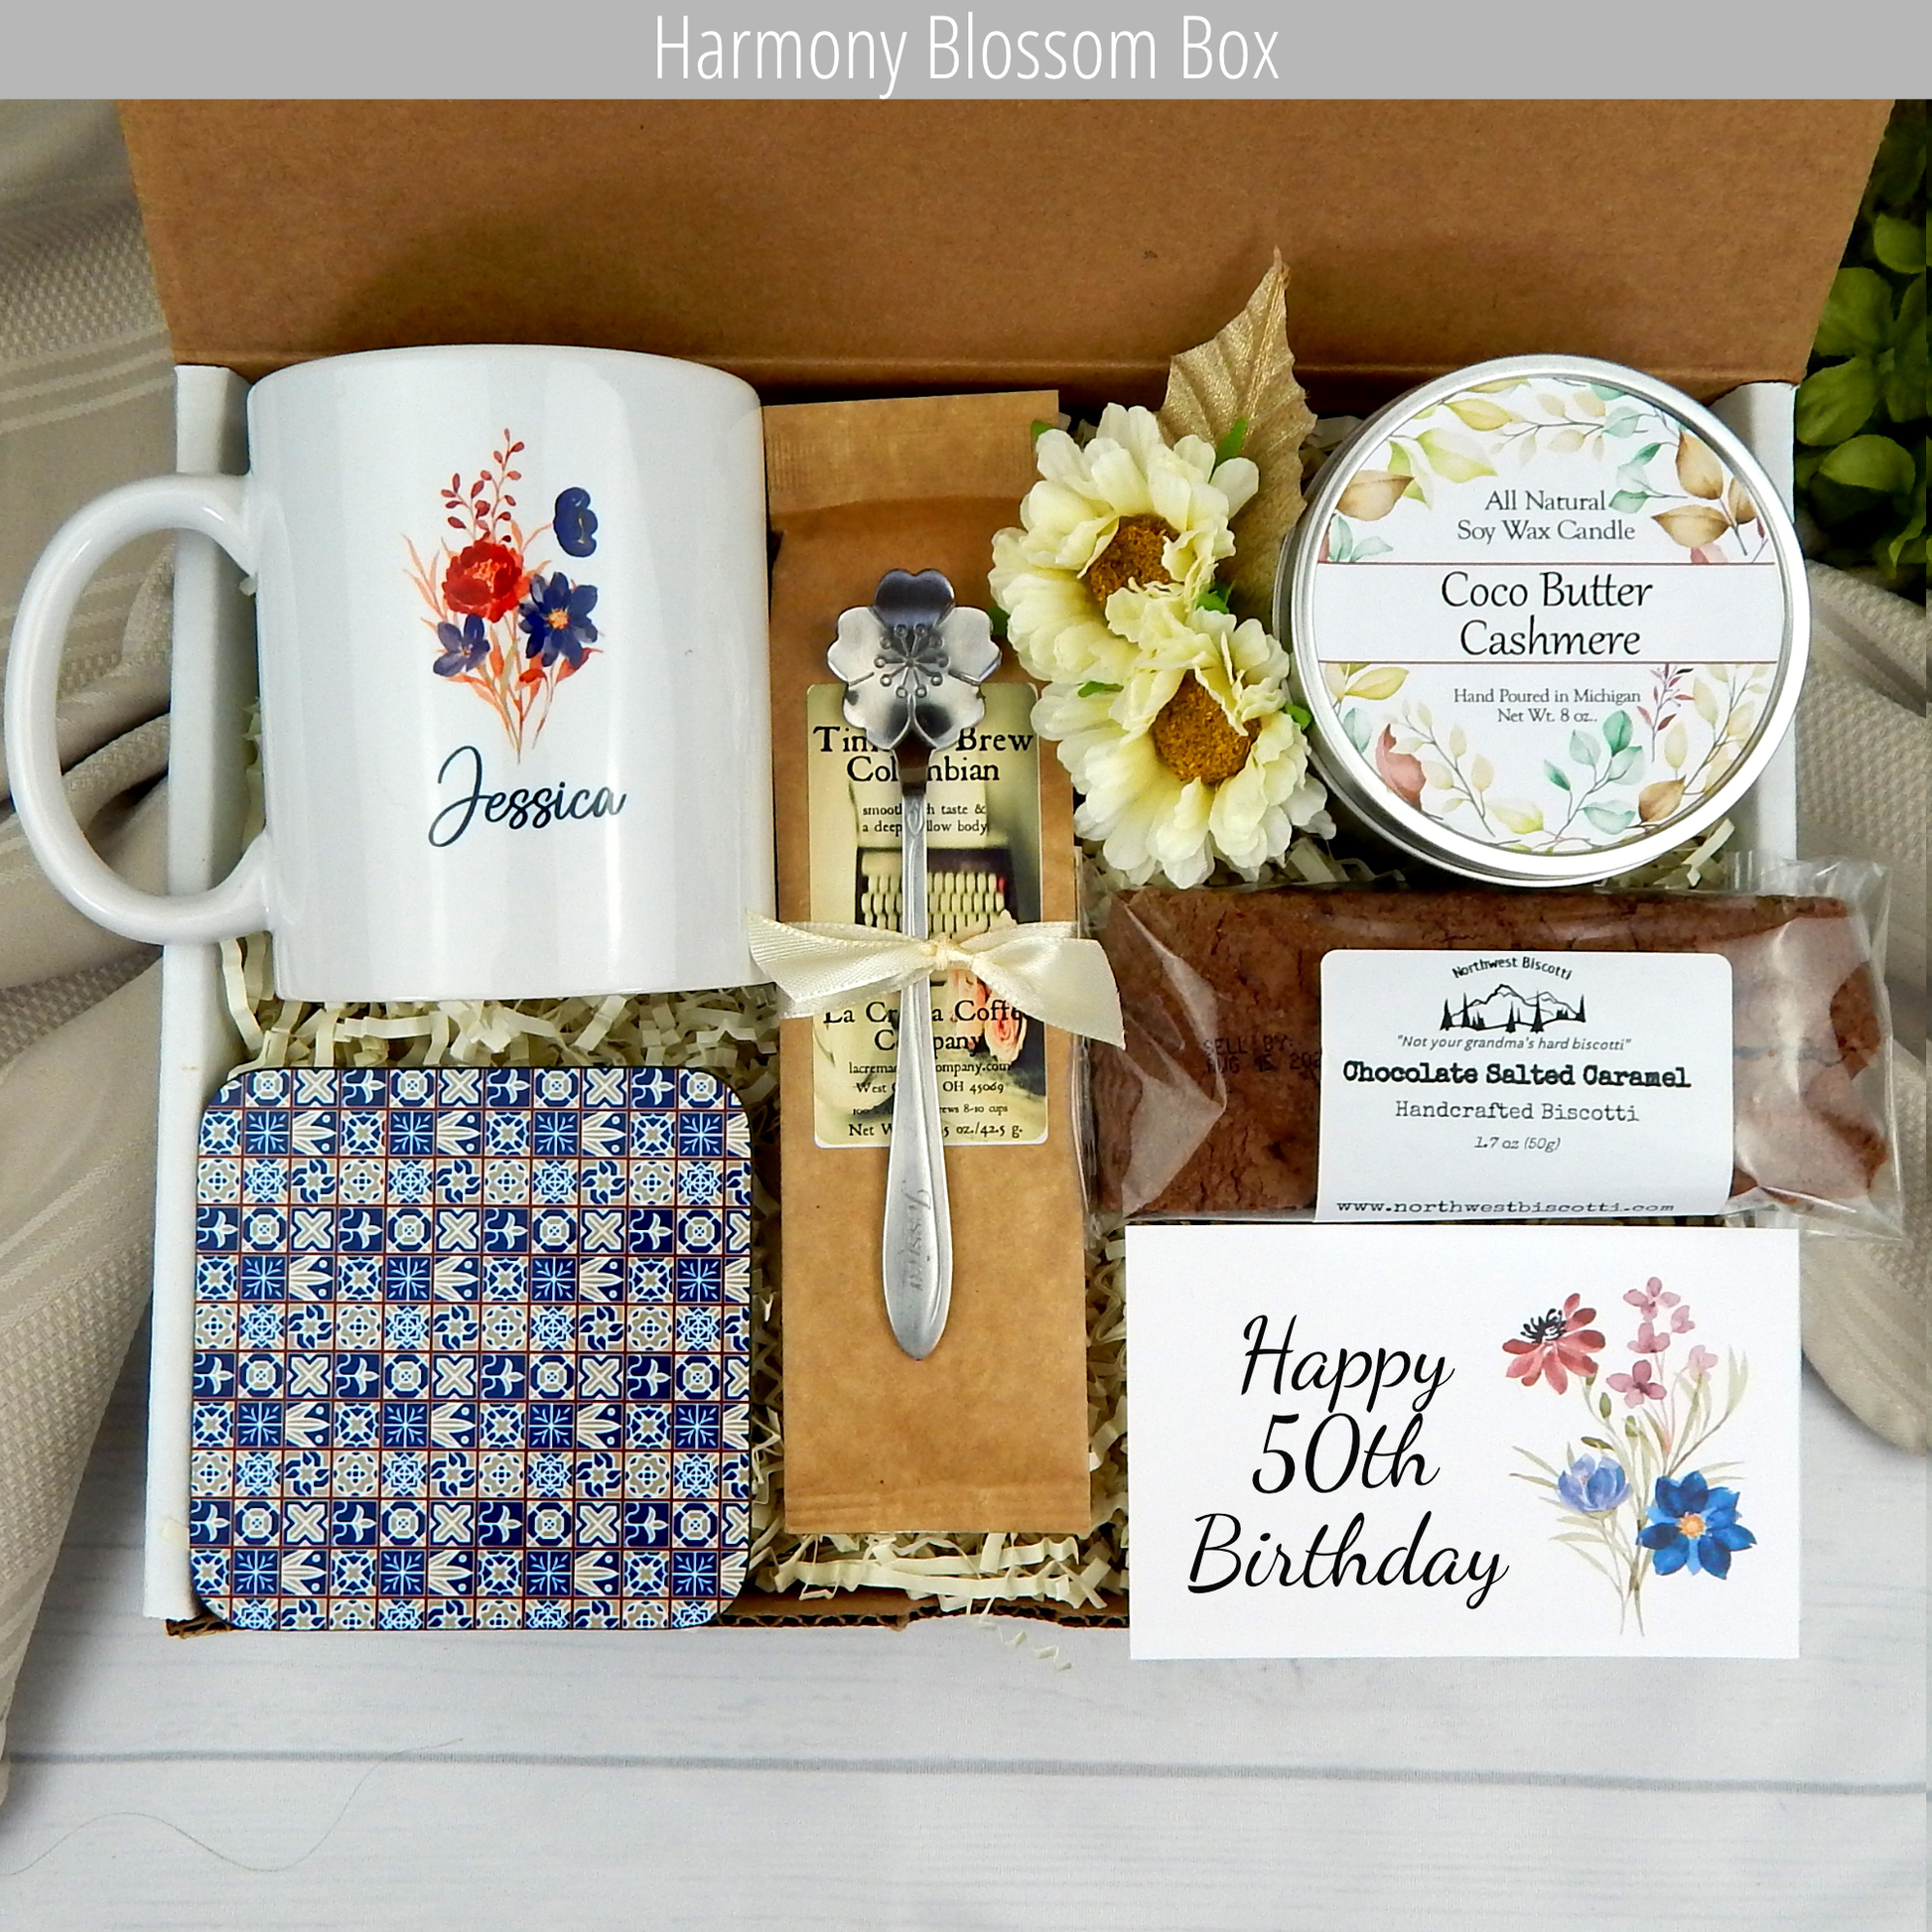 Sip and savor: 50th birthday gift basket for her with a custom name mug, coffee, and scrumptious treats.